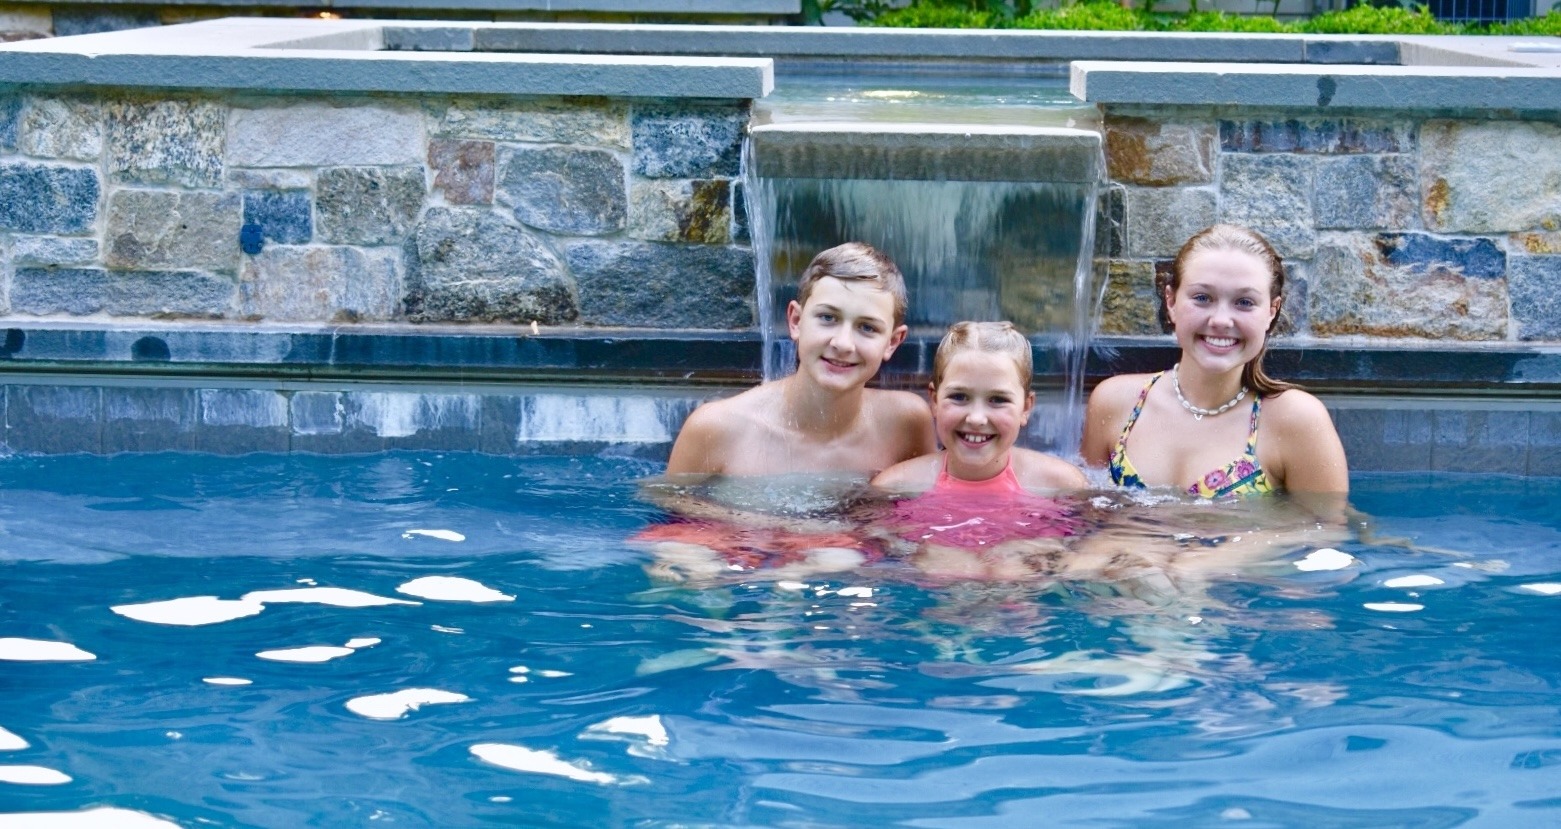 Three smiling young individuals are in a swimming pool with a stone waterfall feature behind them. They appear to be enjoying a leisurely swim.